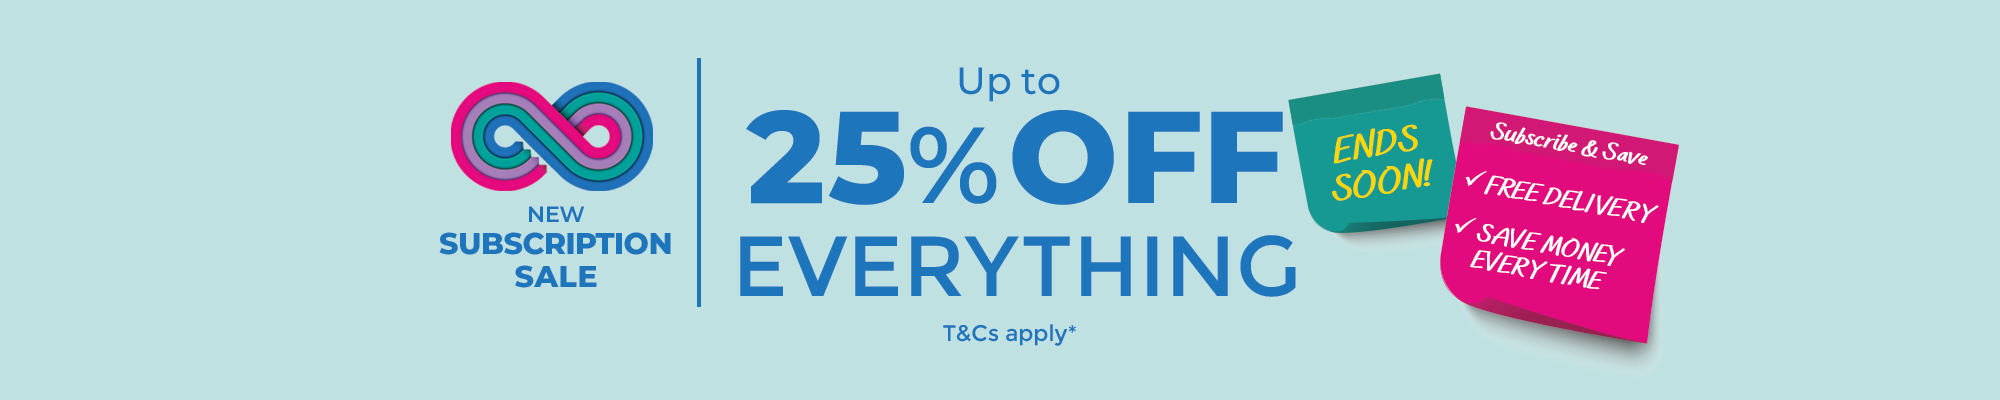 New Subscription Sale - Up to 25% off everything. Ends Soon.